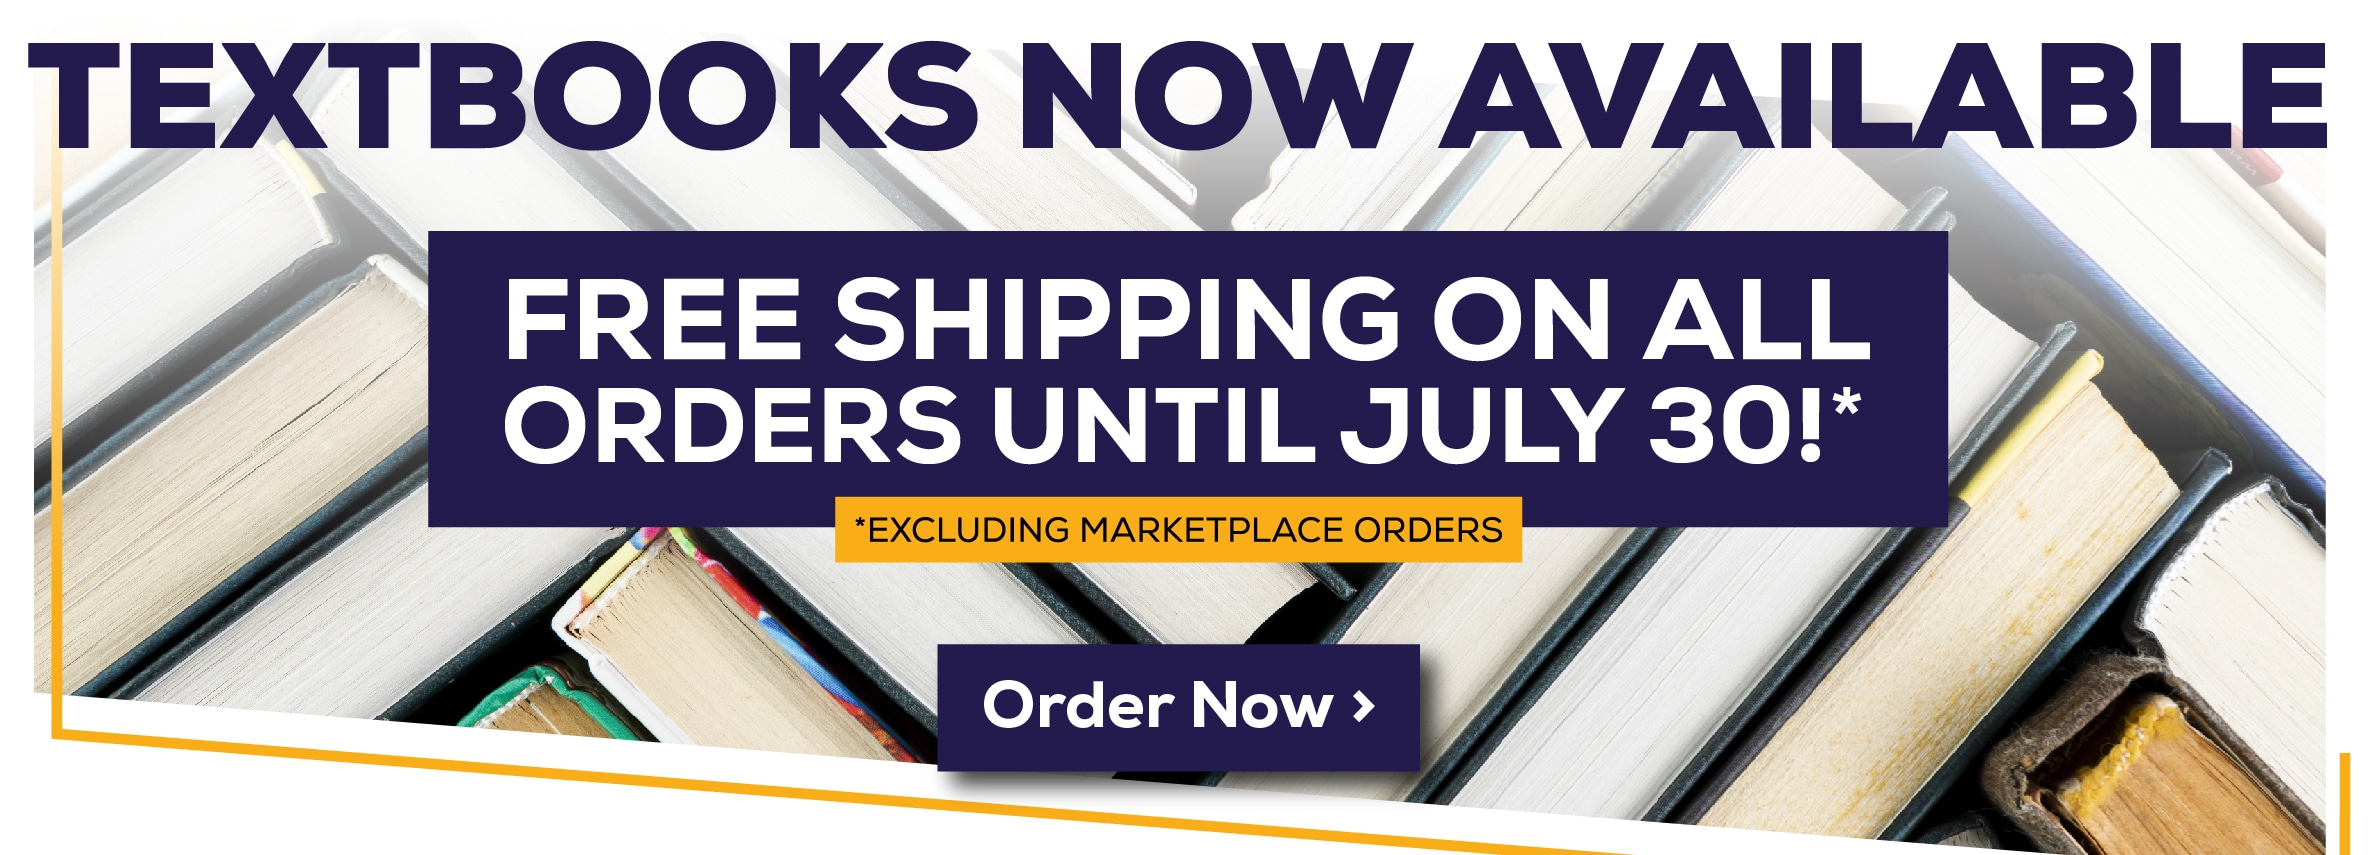 Textbooks Now Available. Free shipping on all orders until July 30. Excluding marketplace orders. Order now!